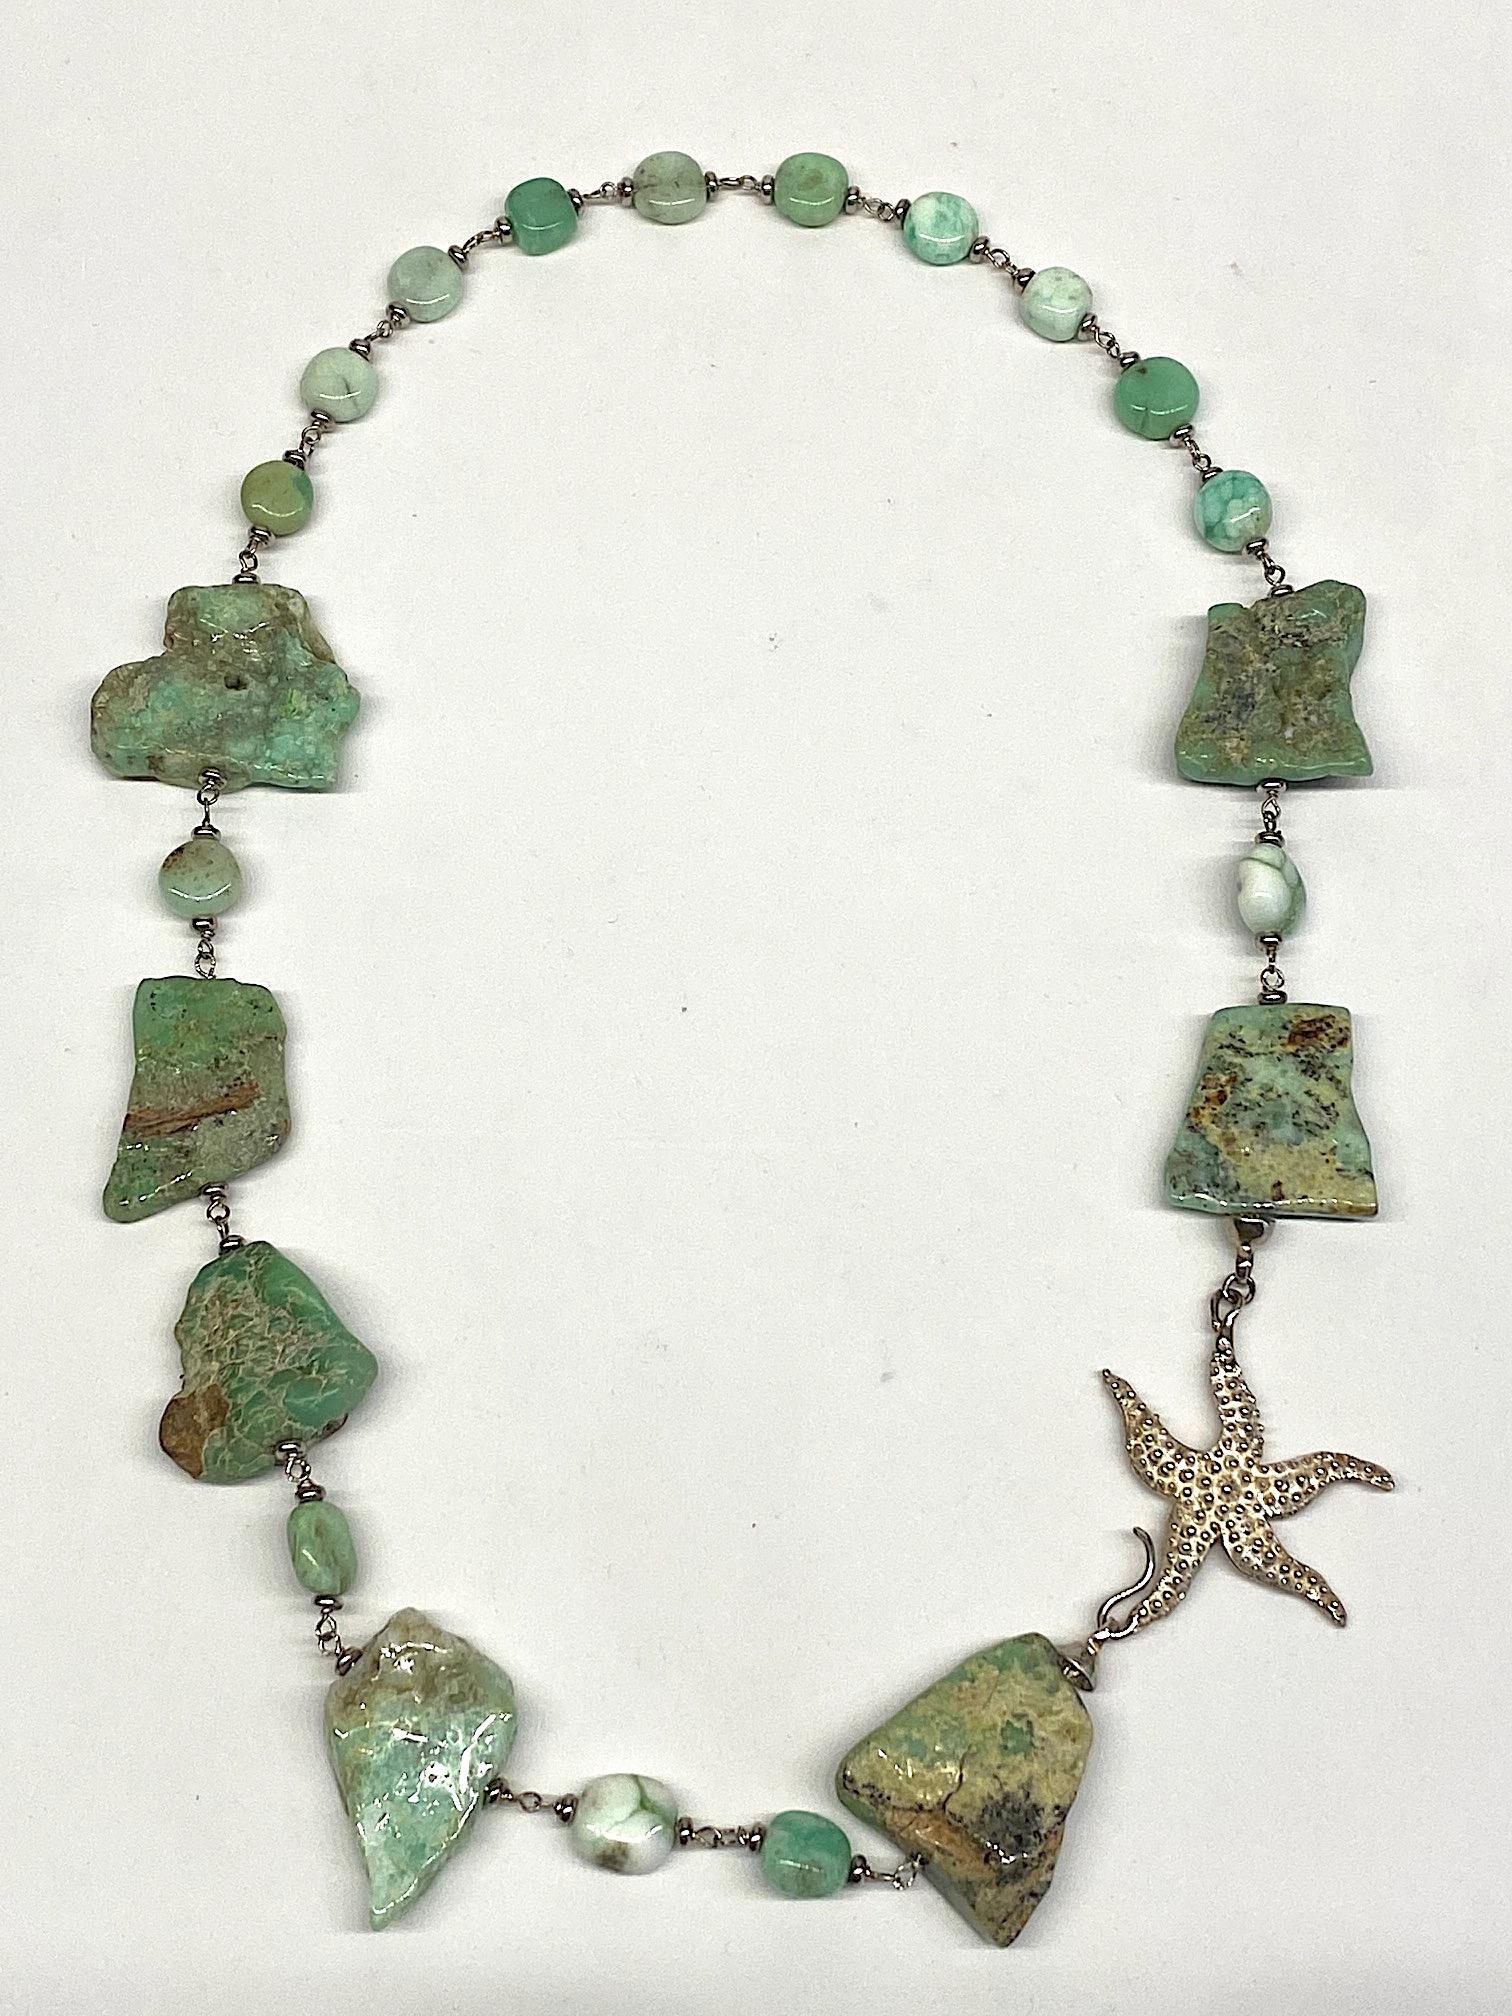 An artisan made necklace purchased in Italy and comprised of six large chunks of polished natural aquamarine stones. The stones range approximately in size 1.25 inches wide and long and .5 of an inch deep to 1.5 inches wide, 1.63 inches long and .38